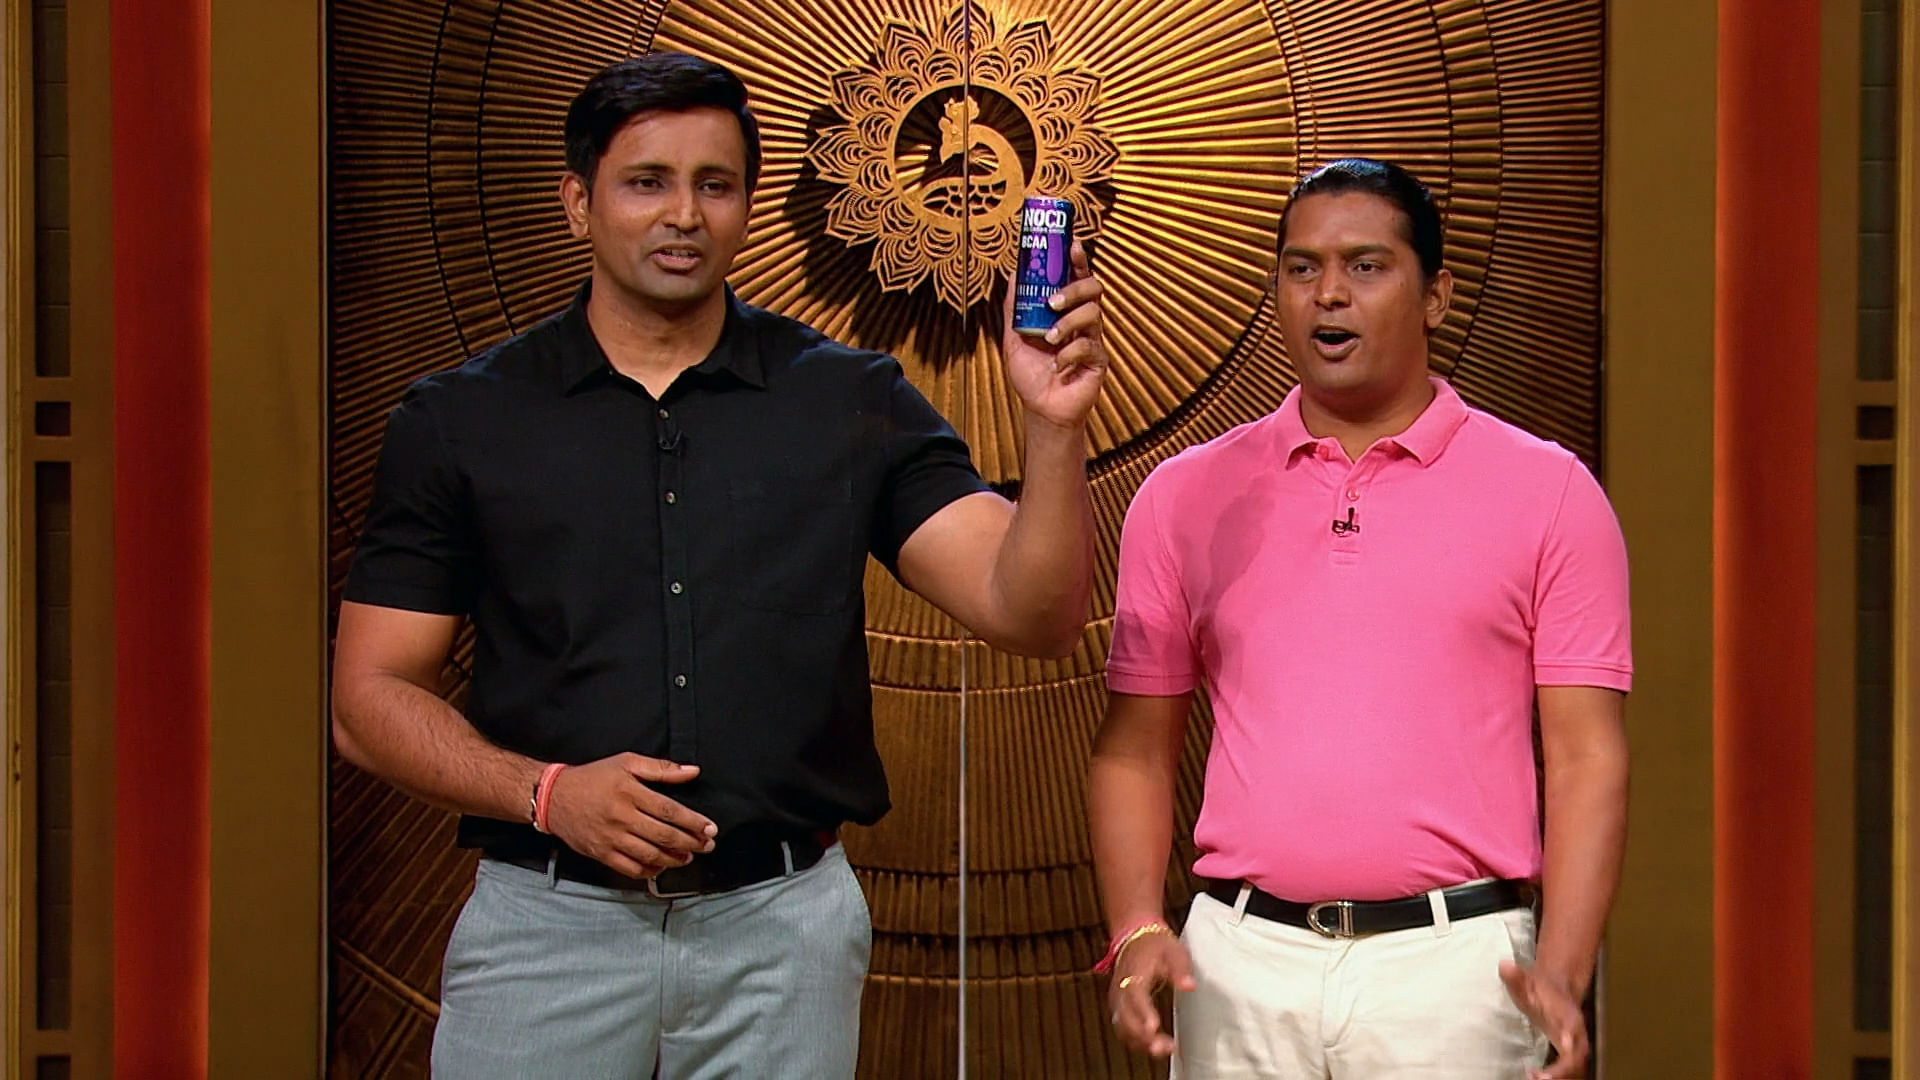 Siddharth Mishra and Vinay Kumar of energy drink startup NOCD. Screengrabs from Shark Tank India. Pics Credit: SET India/YouTube